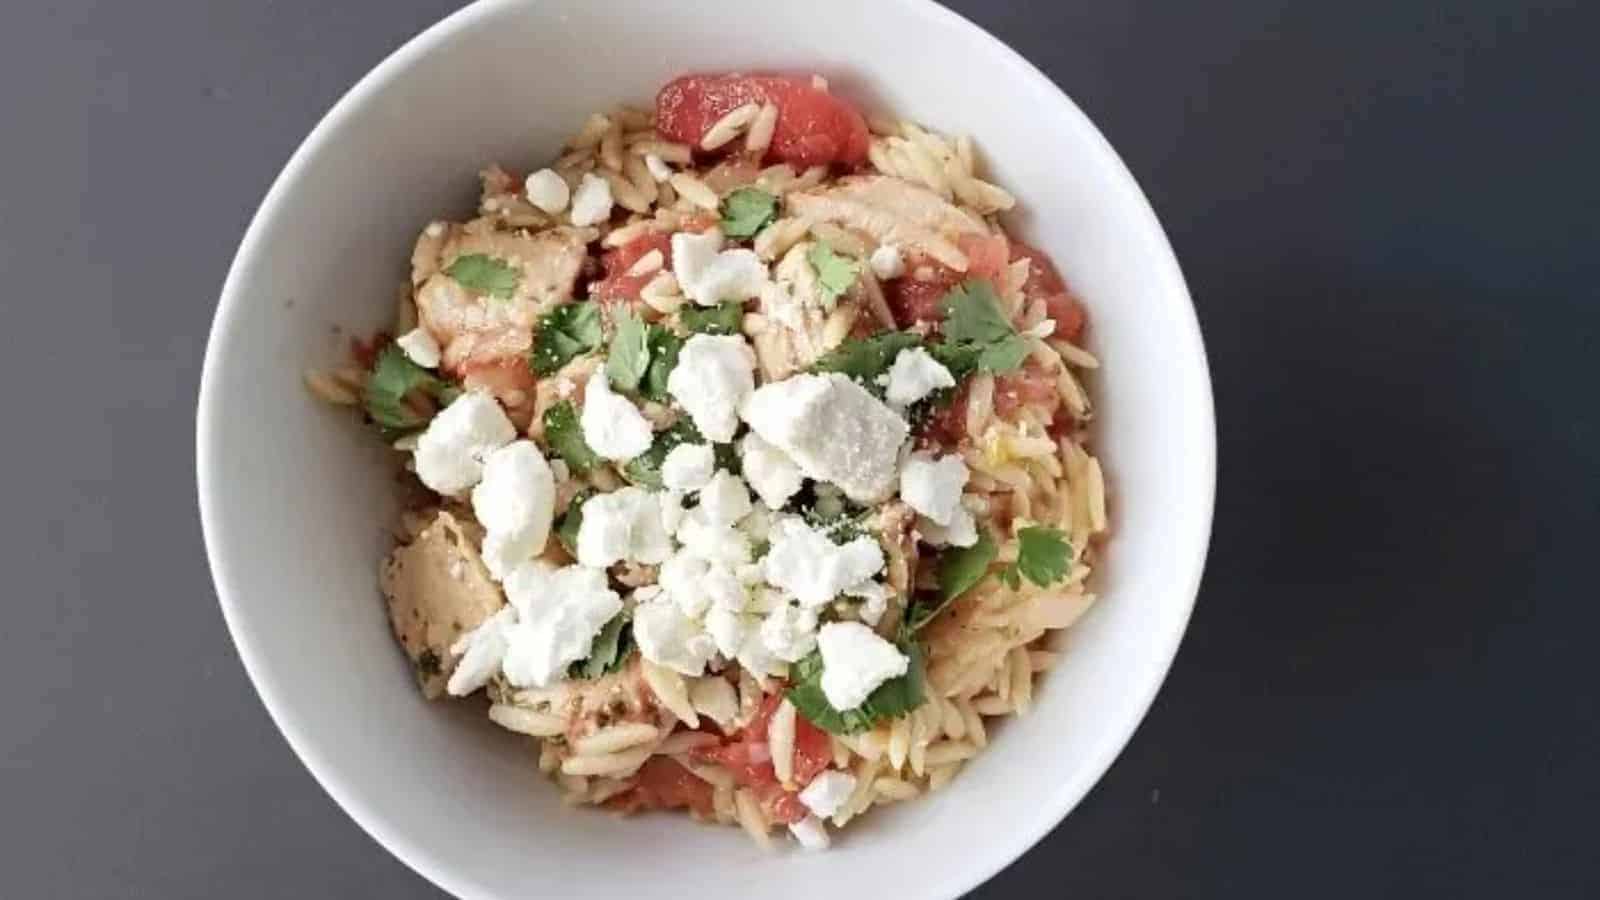 Image shows a closeup view of tuna and tomato pasta in a white patterned bowl.